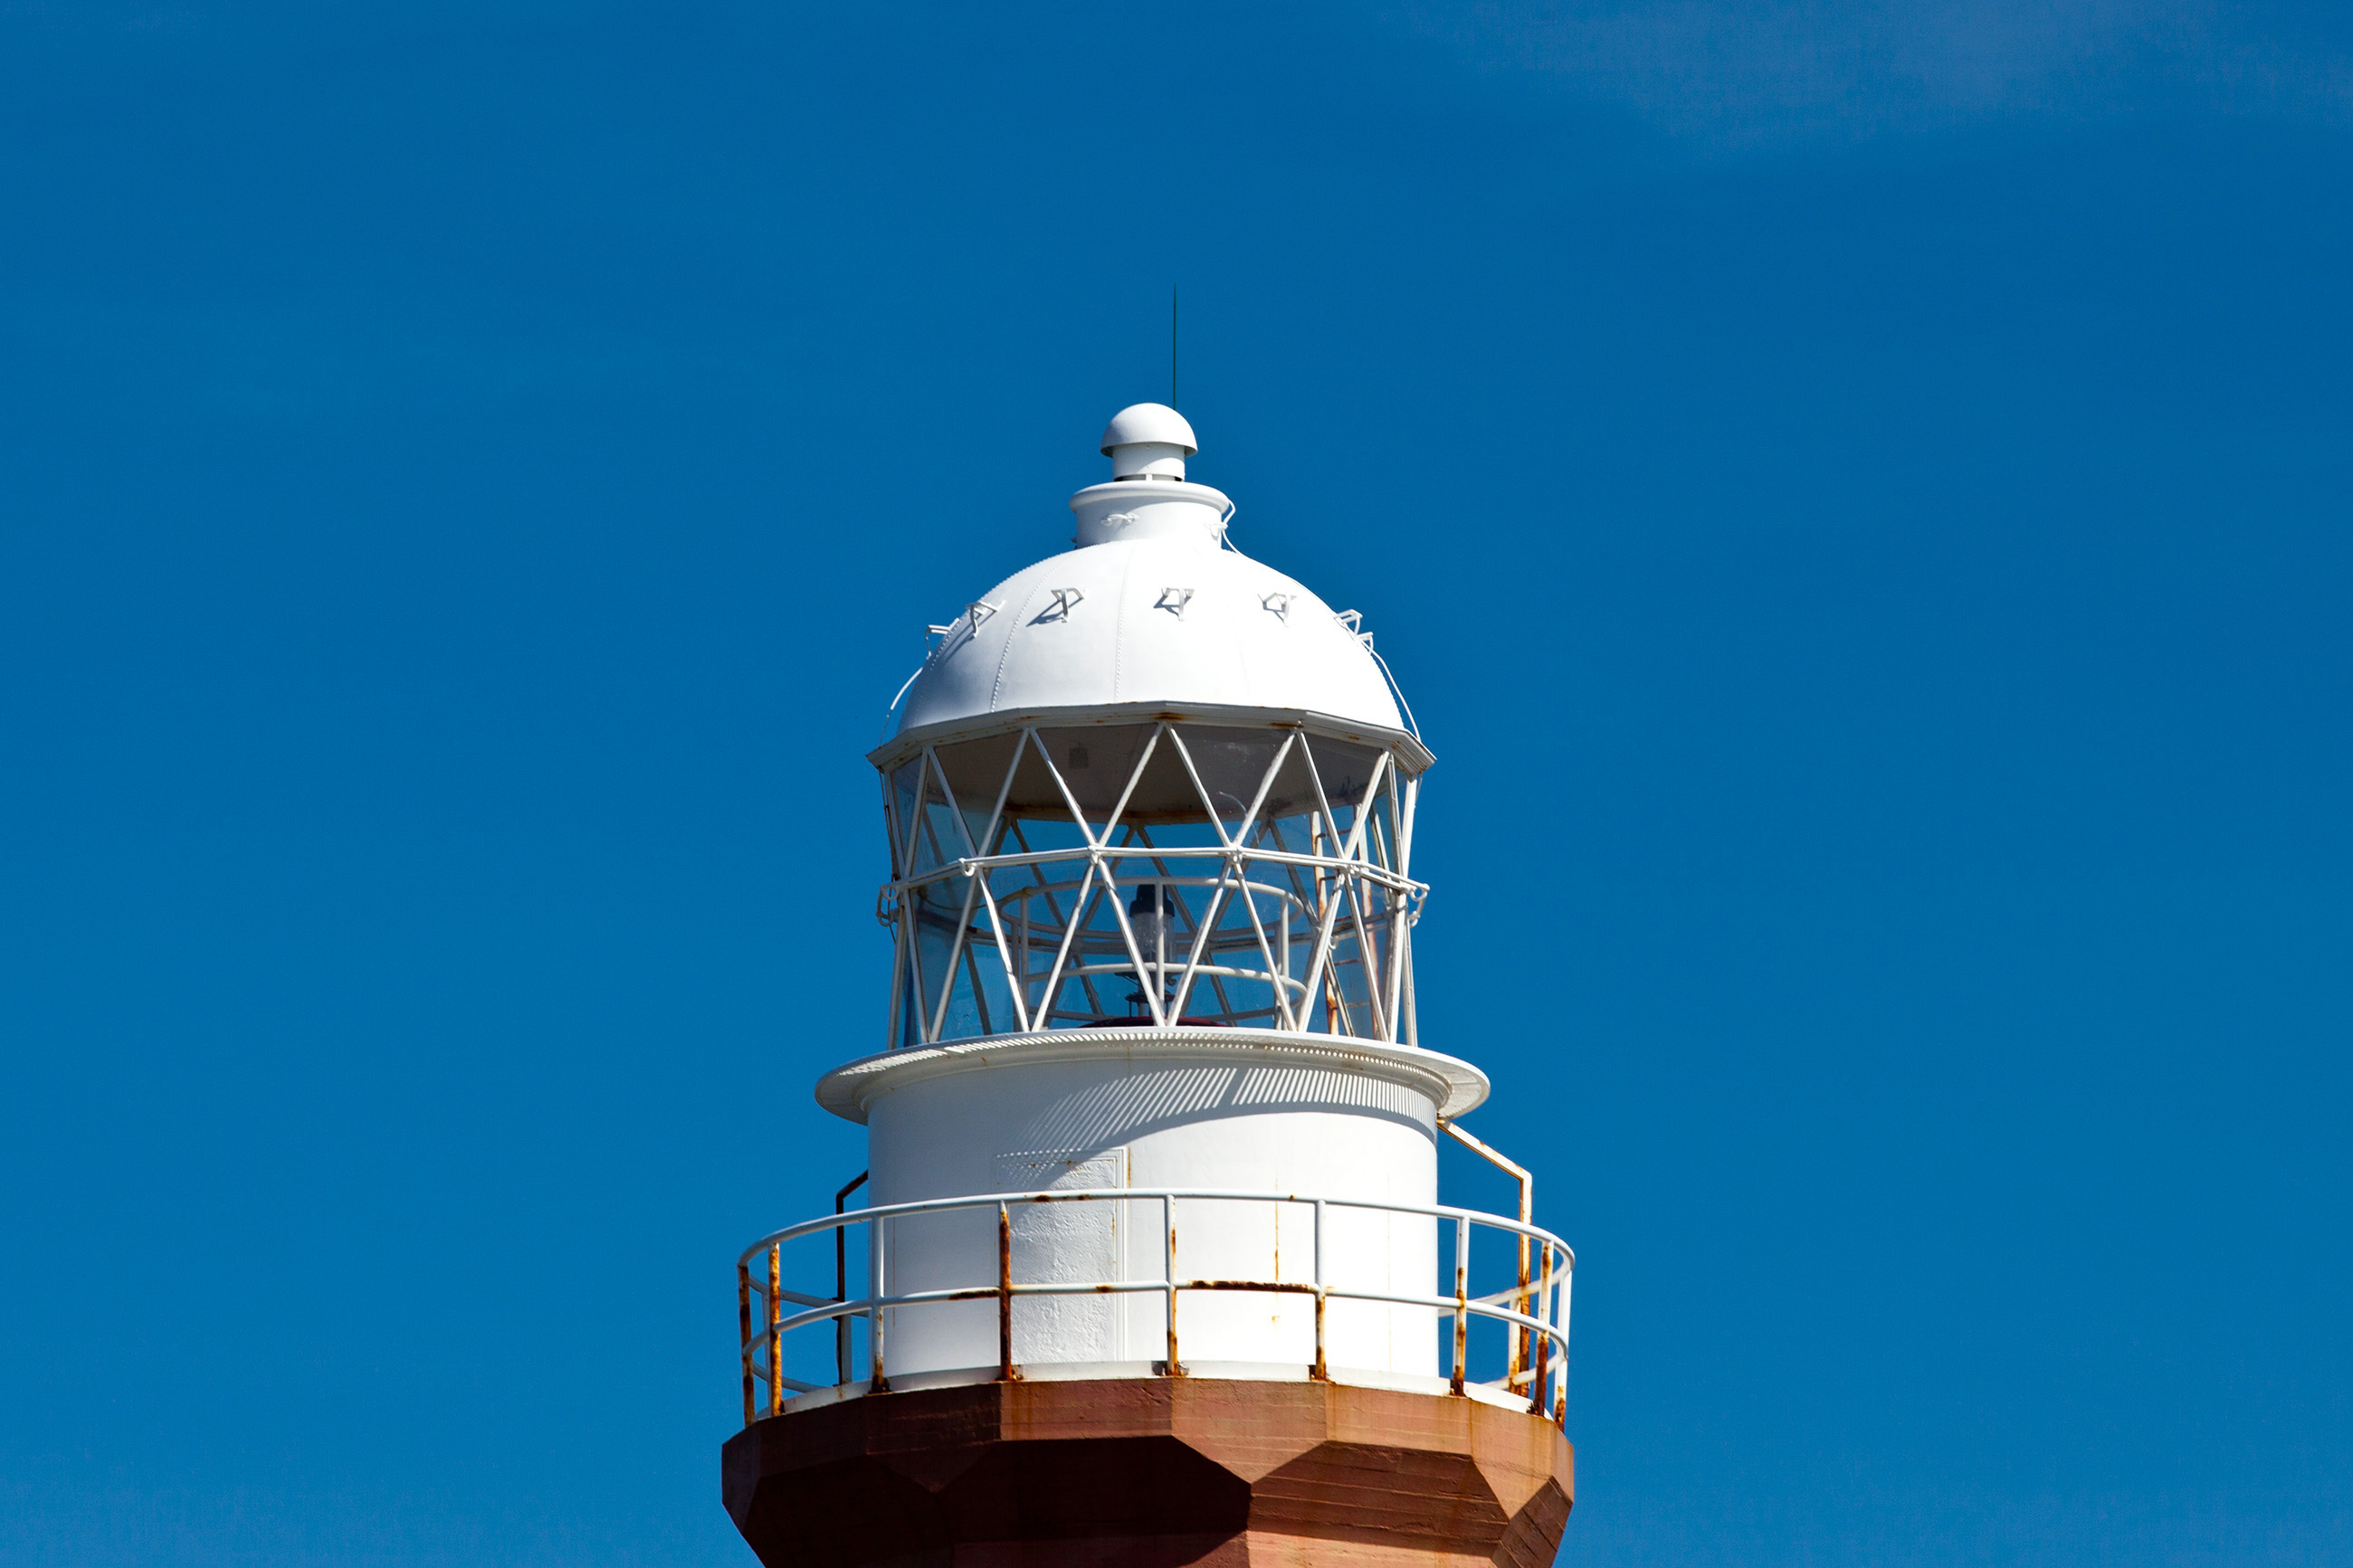 Lighthouse tower photo